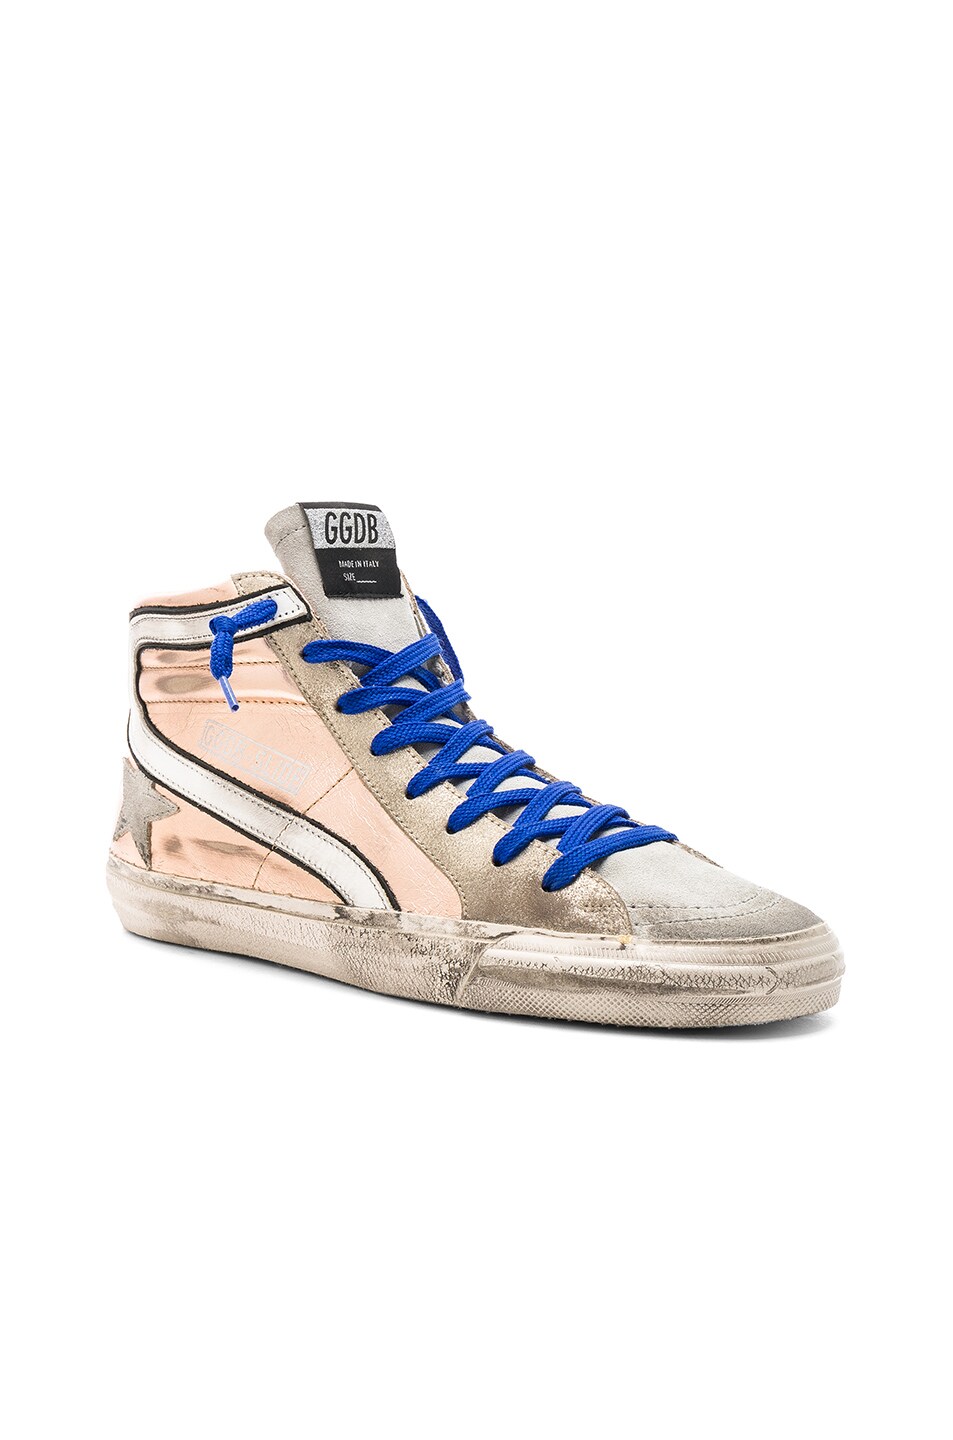 Golden Goose Laminated Slide Sneakers in Rose Gold & Ice | FWRD